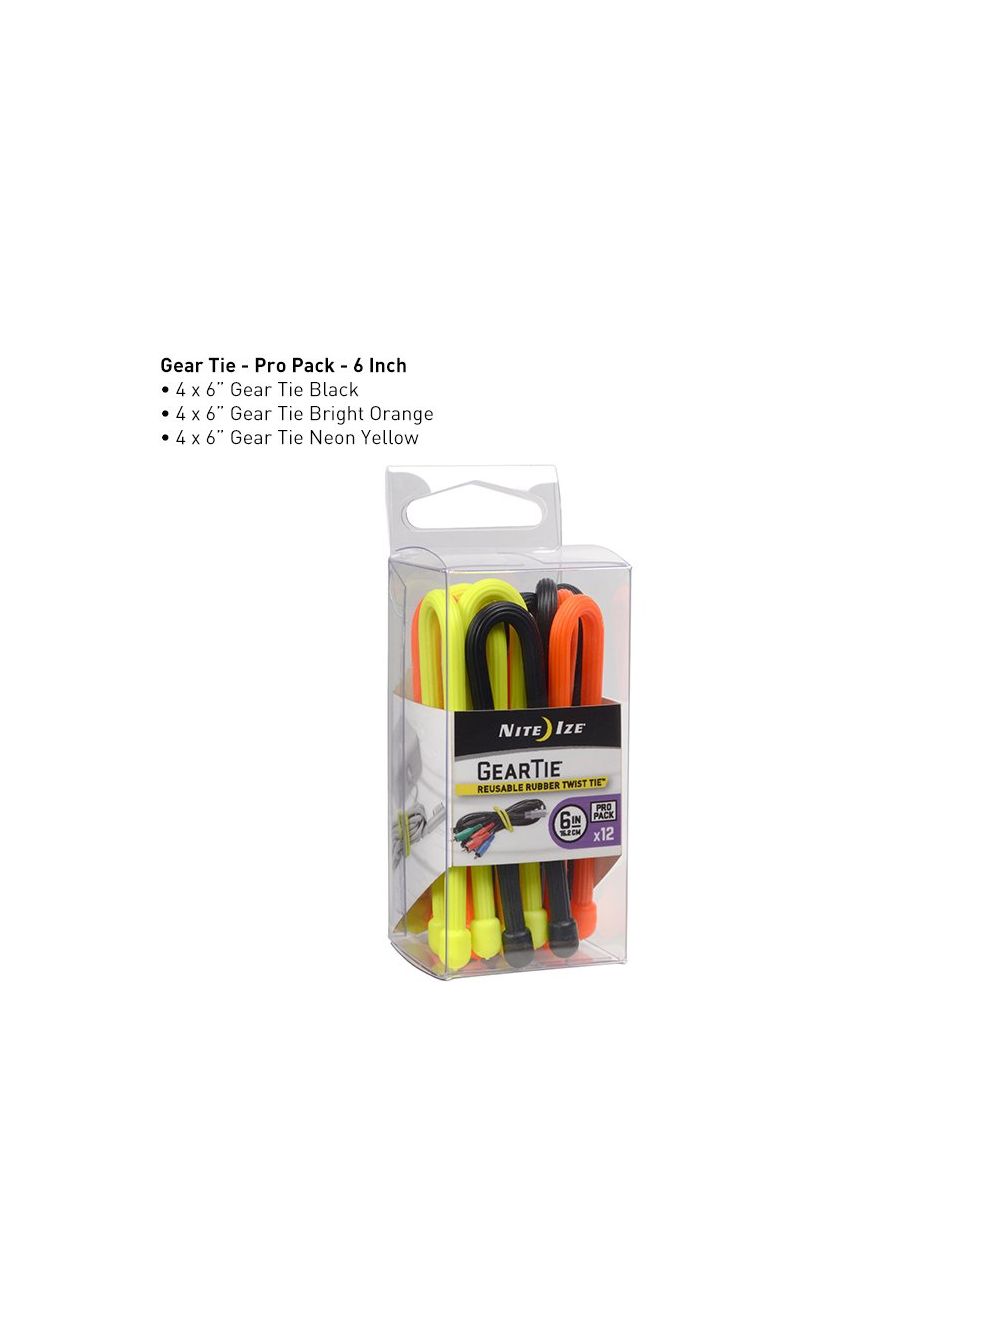 Gear Tie ProPack 6 - 12 Pack - Assorted Colors